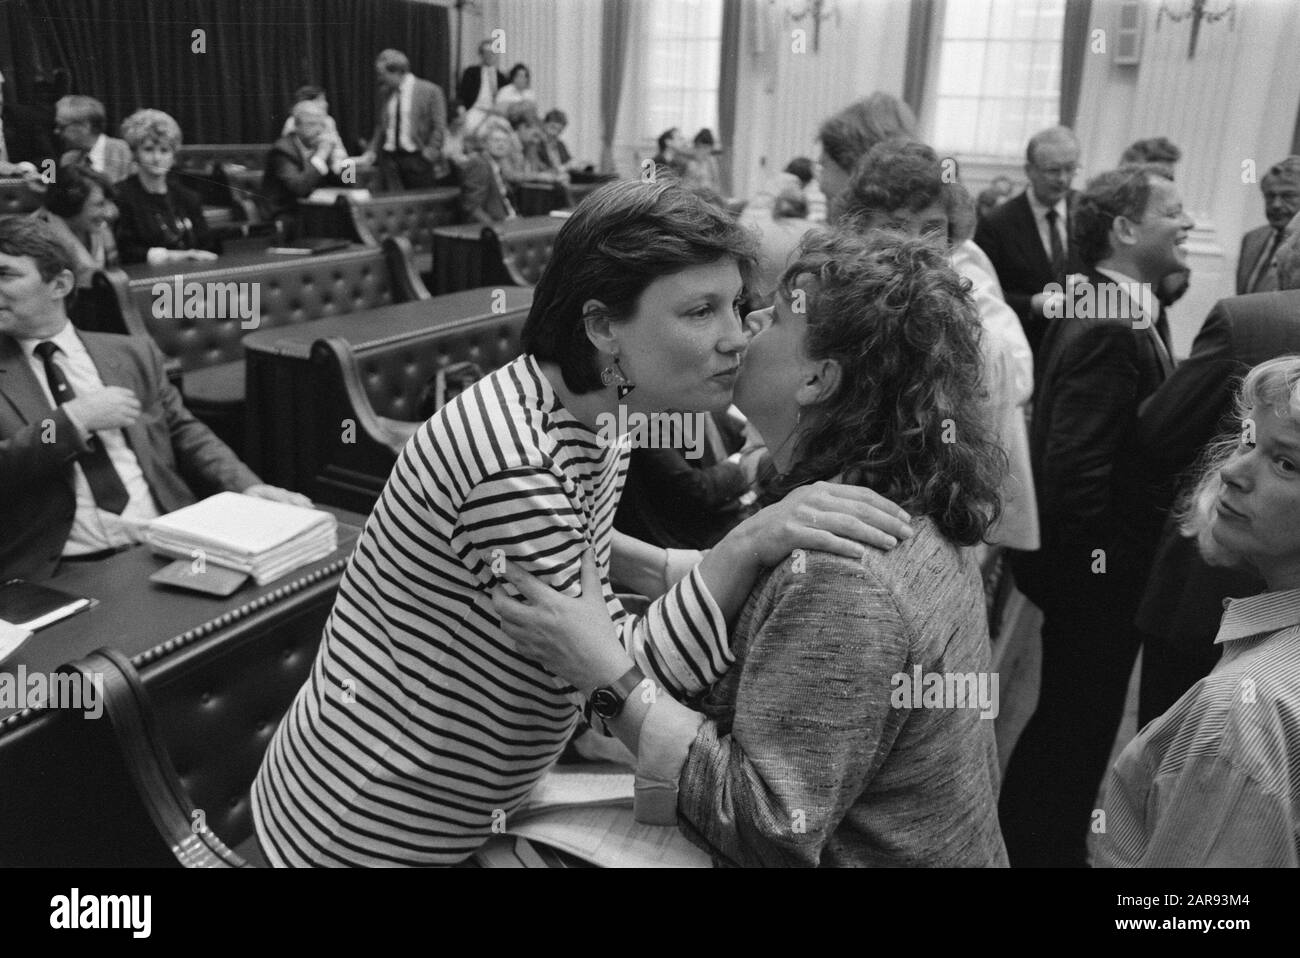 Second Chamber, Andrée van Es (PSP) is congratulated by Jeltje van Nieuwenhoven (r) on the birth of her son Date: August 30, 1988 Keywords: CONGRITATIONS, births Personal name: Esa Andrée van, Nieuwenhove, Jeltje van Institutioningsnaam: PSP Stock Photo